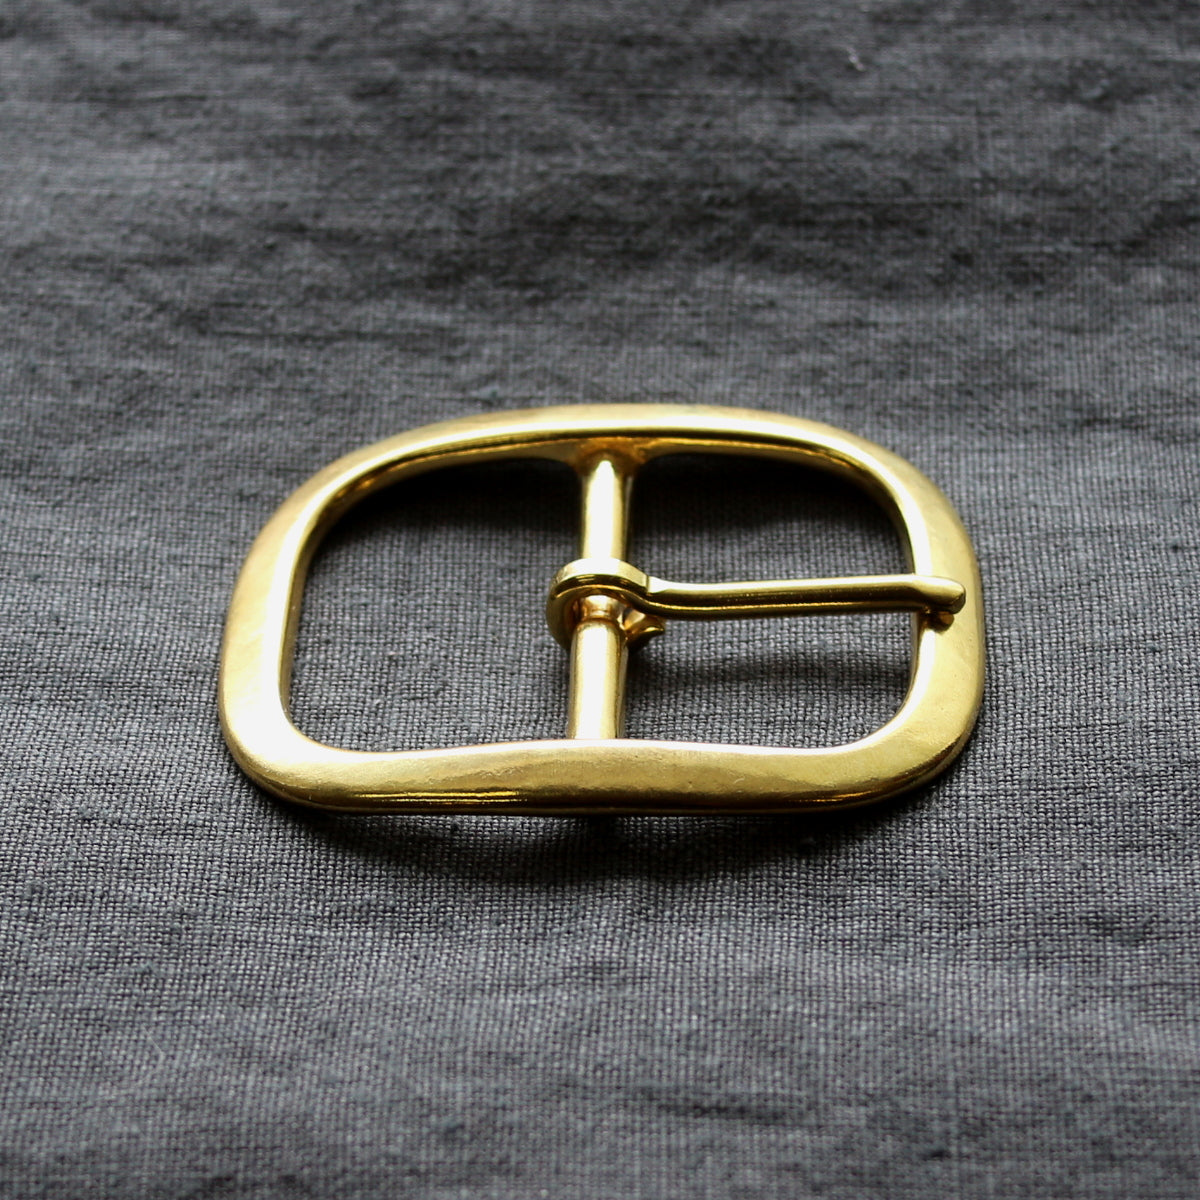 1 3/4 inch Polished Solid Brass Belt Buckle - F1